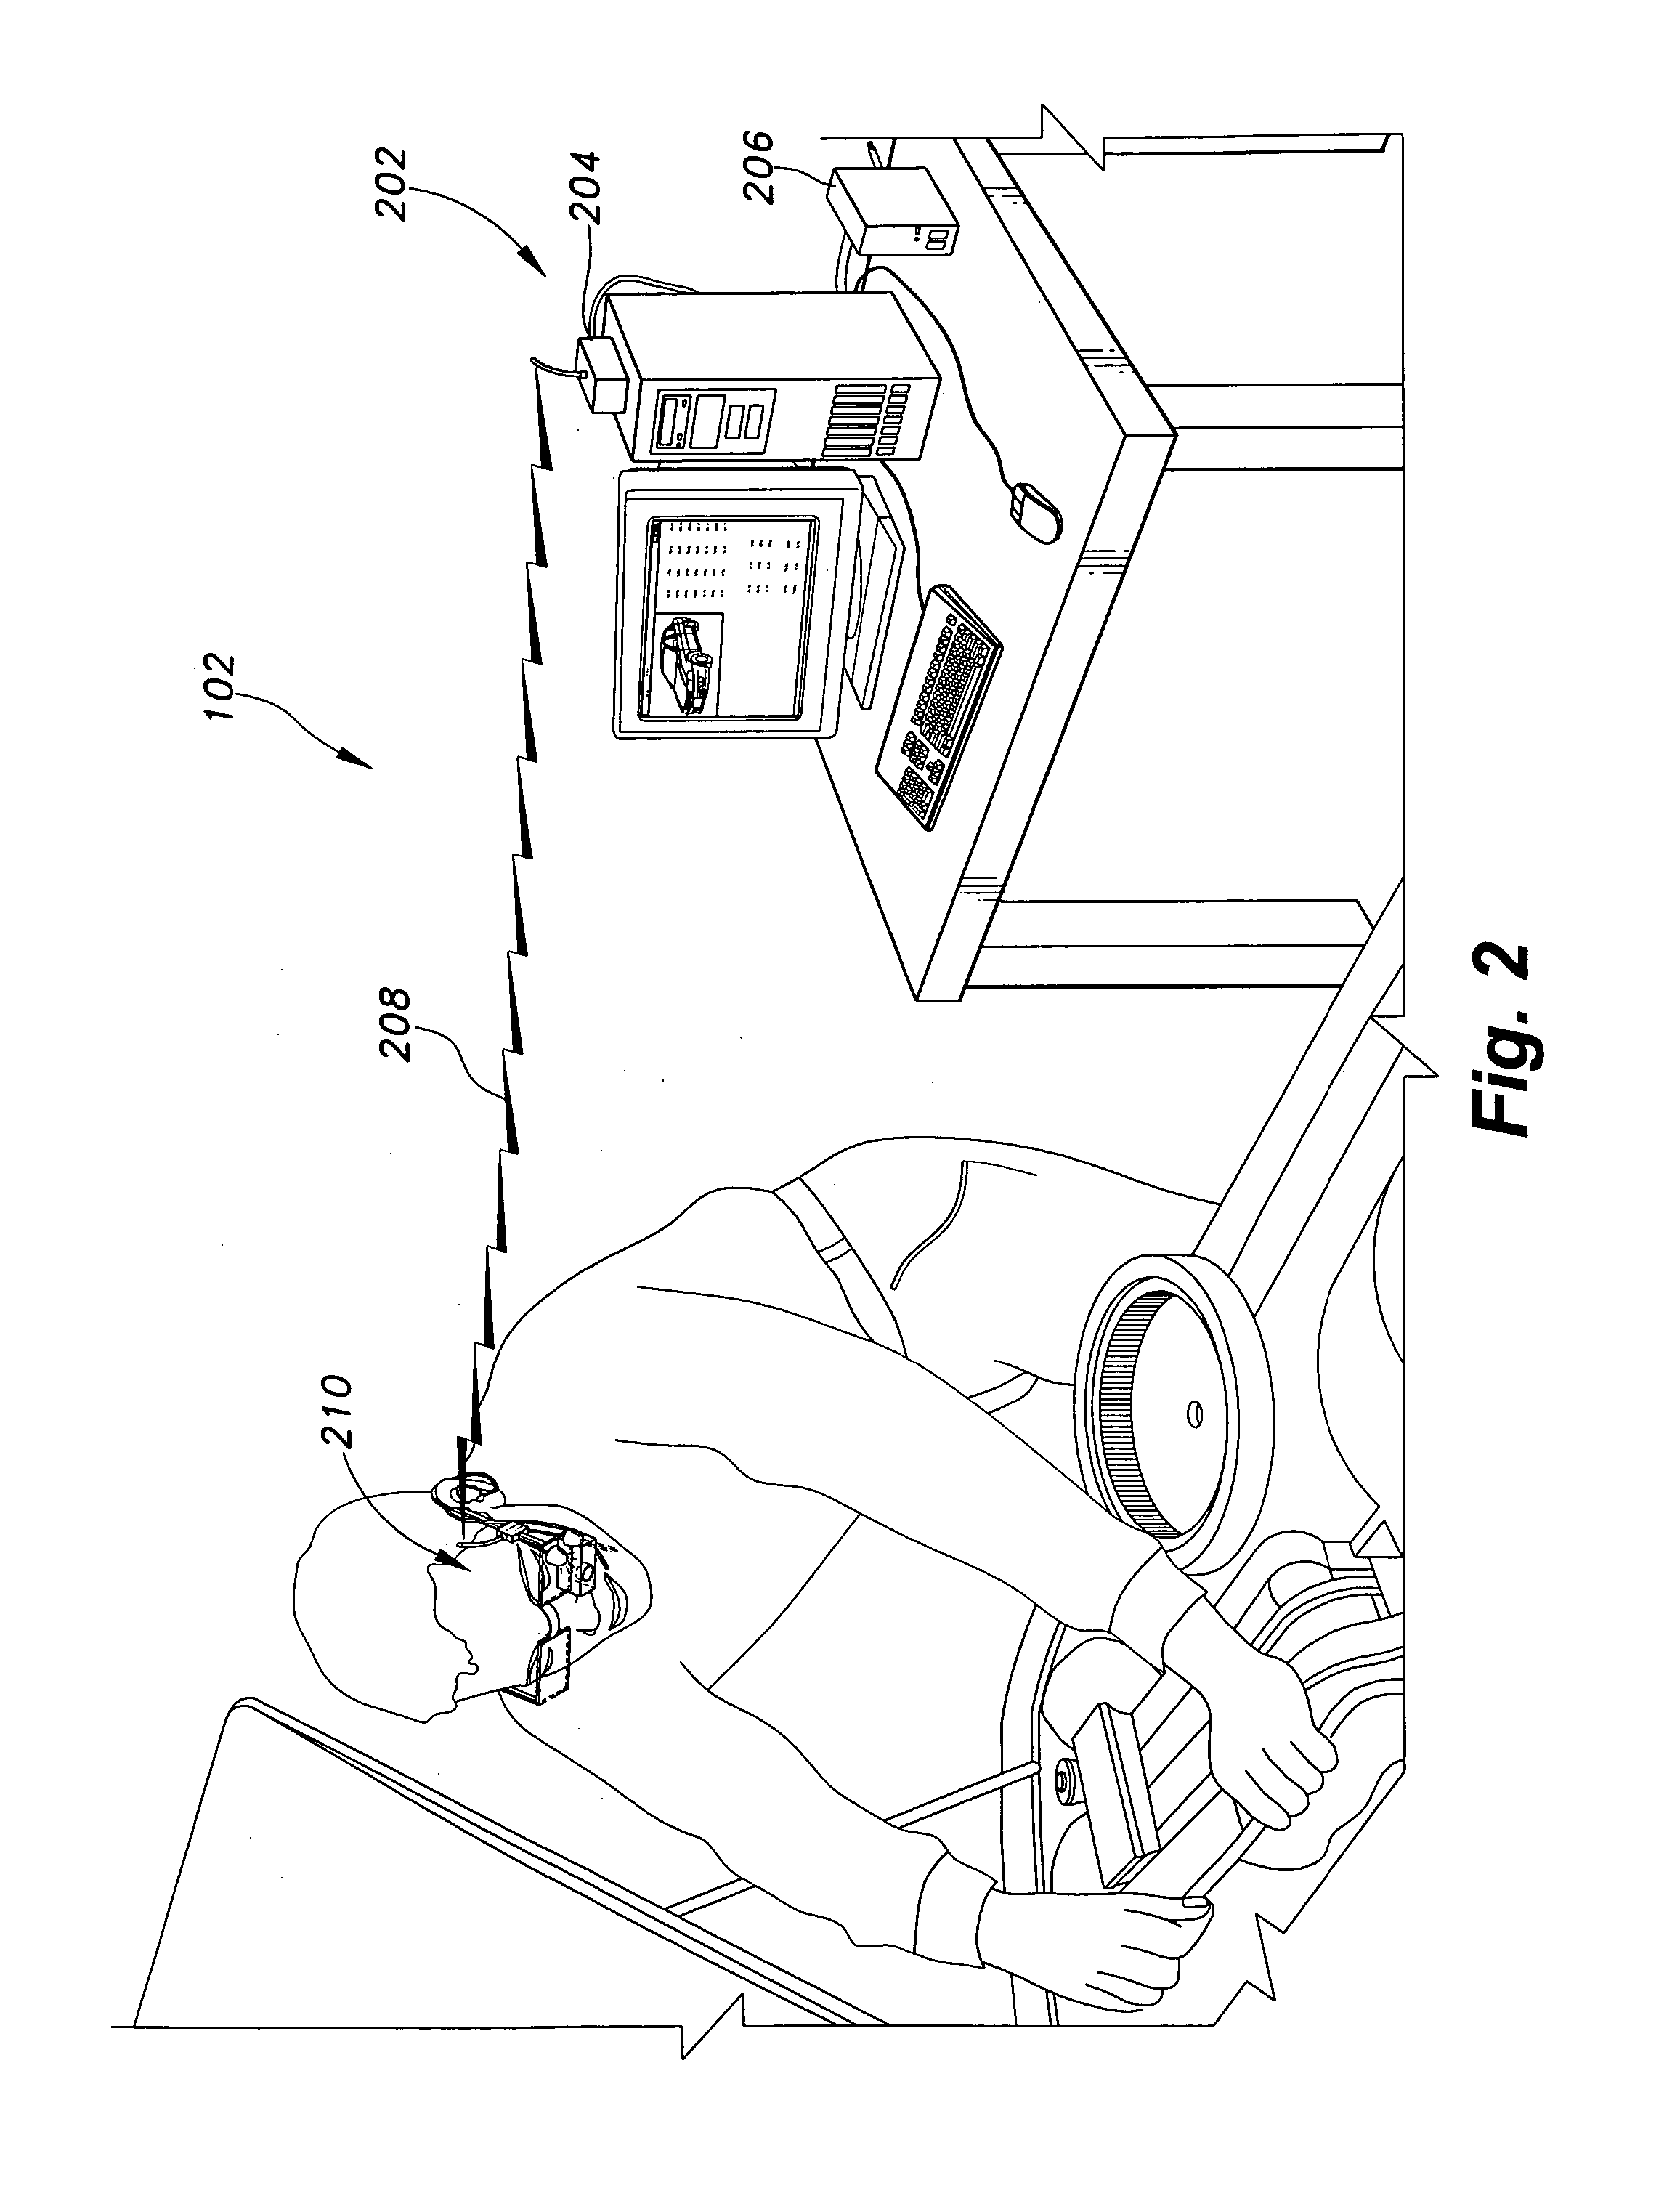 Home improvement telepresence system and method